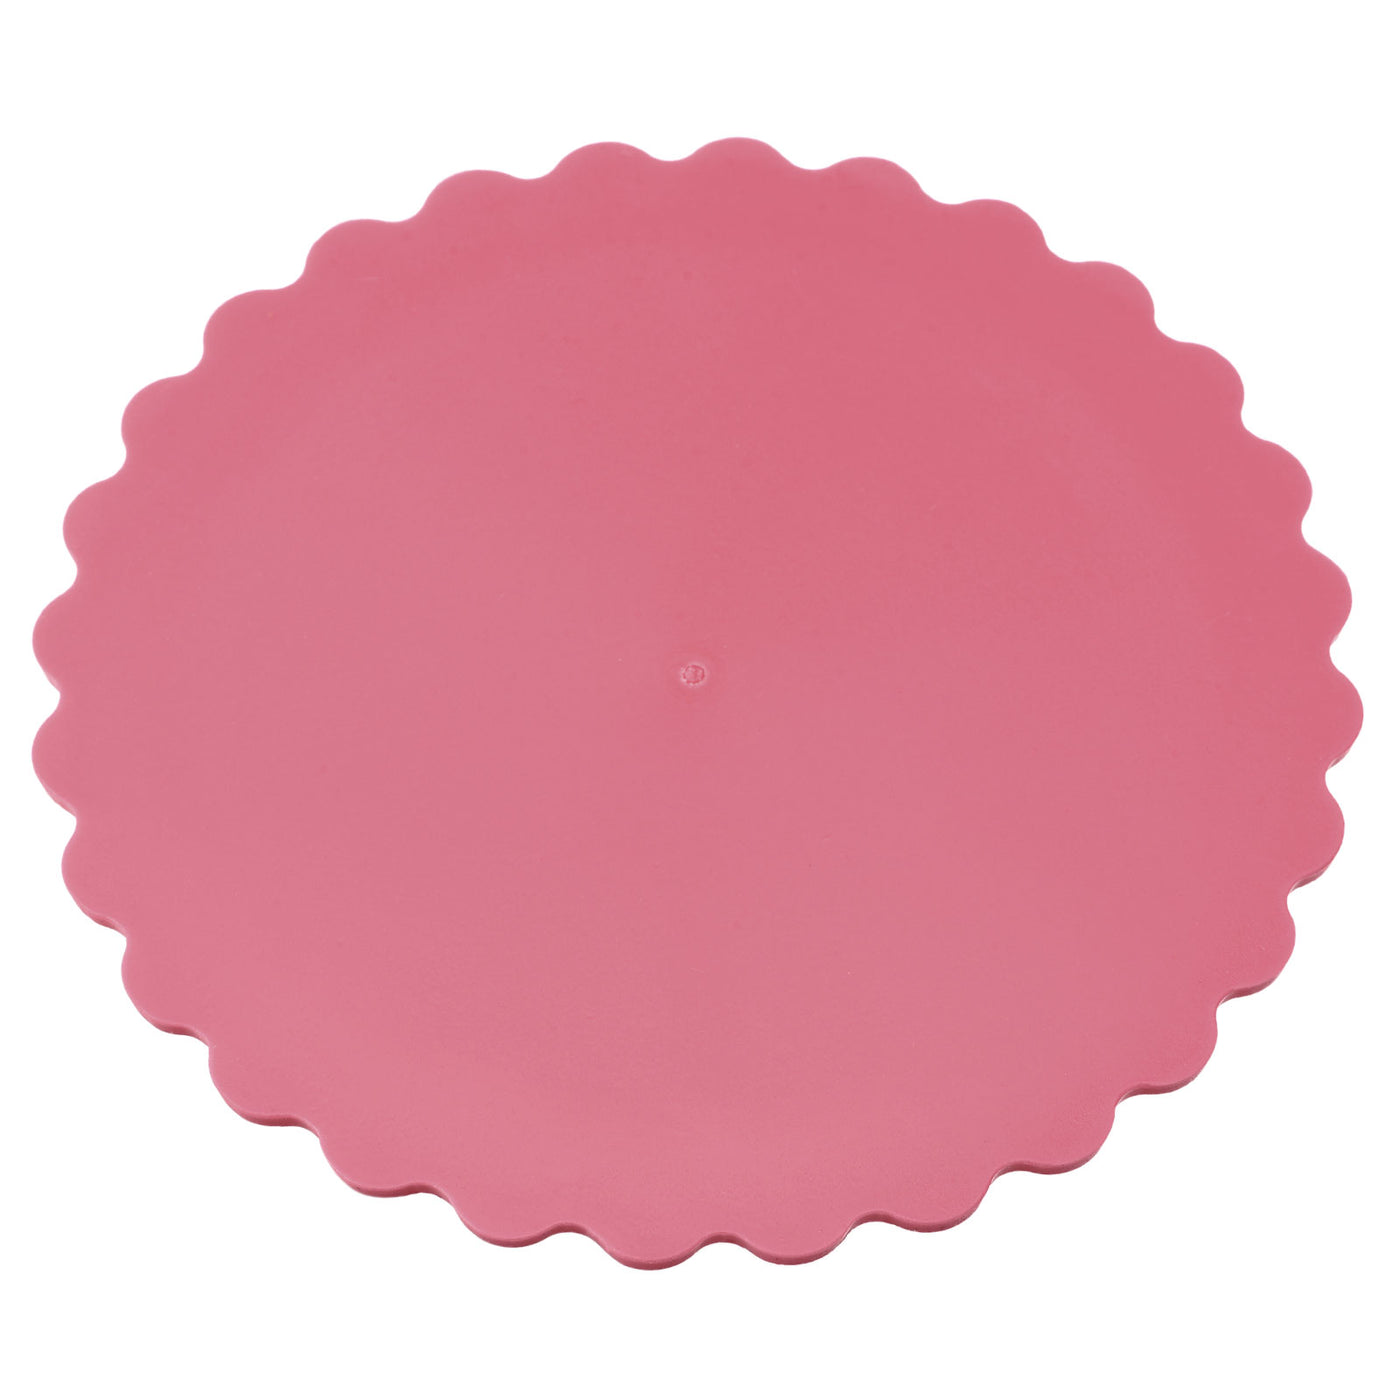 uxcell Uxcell 105mm(4.13") Round Coasters Soft PVC Cup Mat Pad for Tableware Pink 4pcs